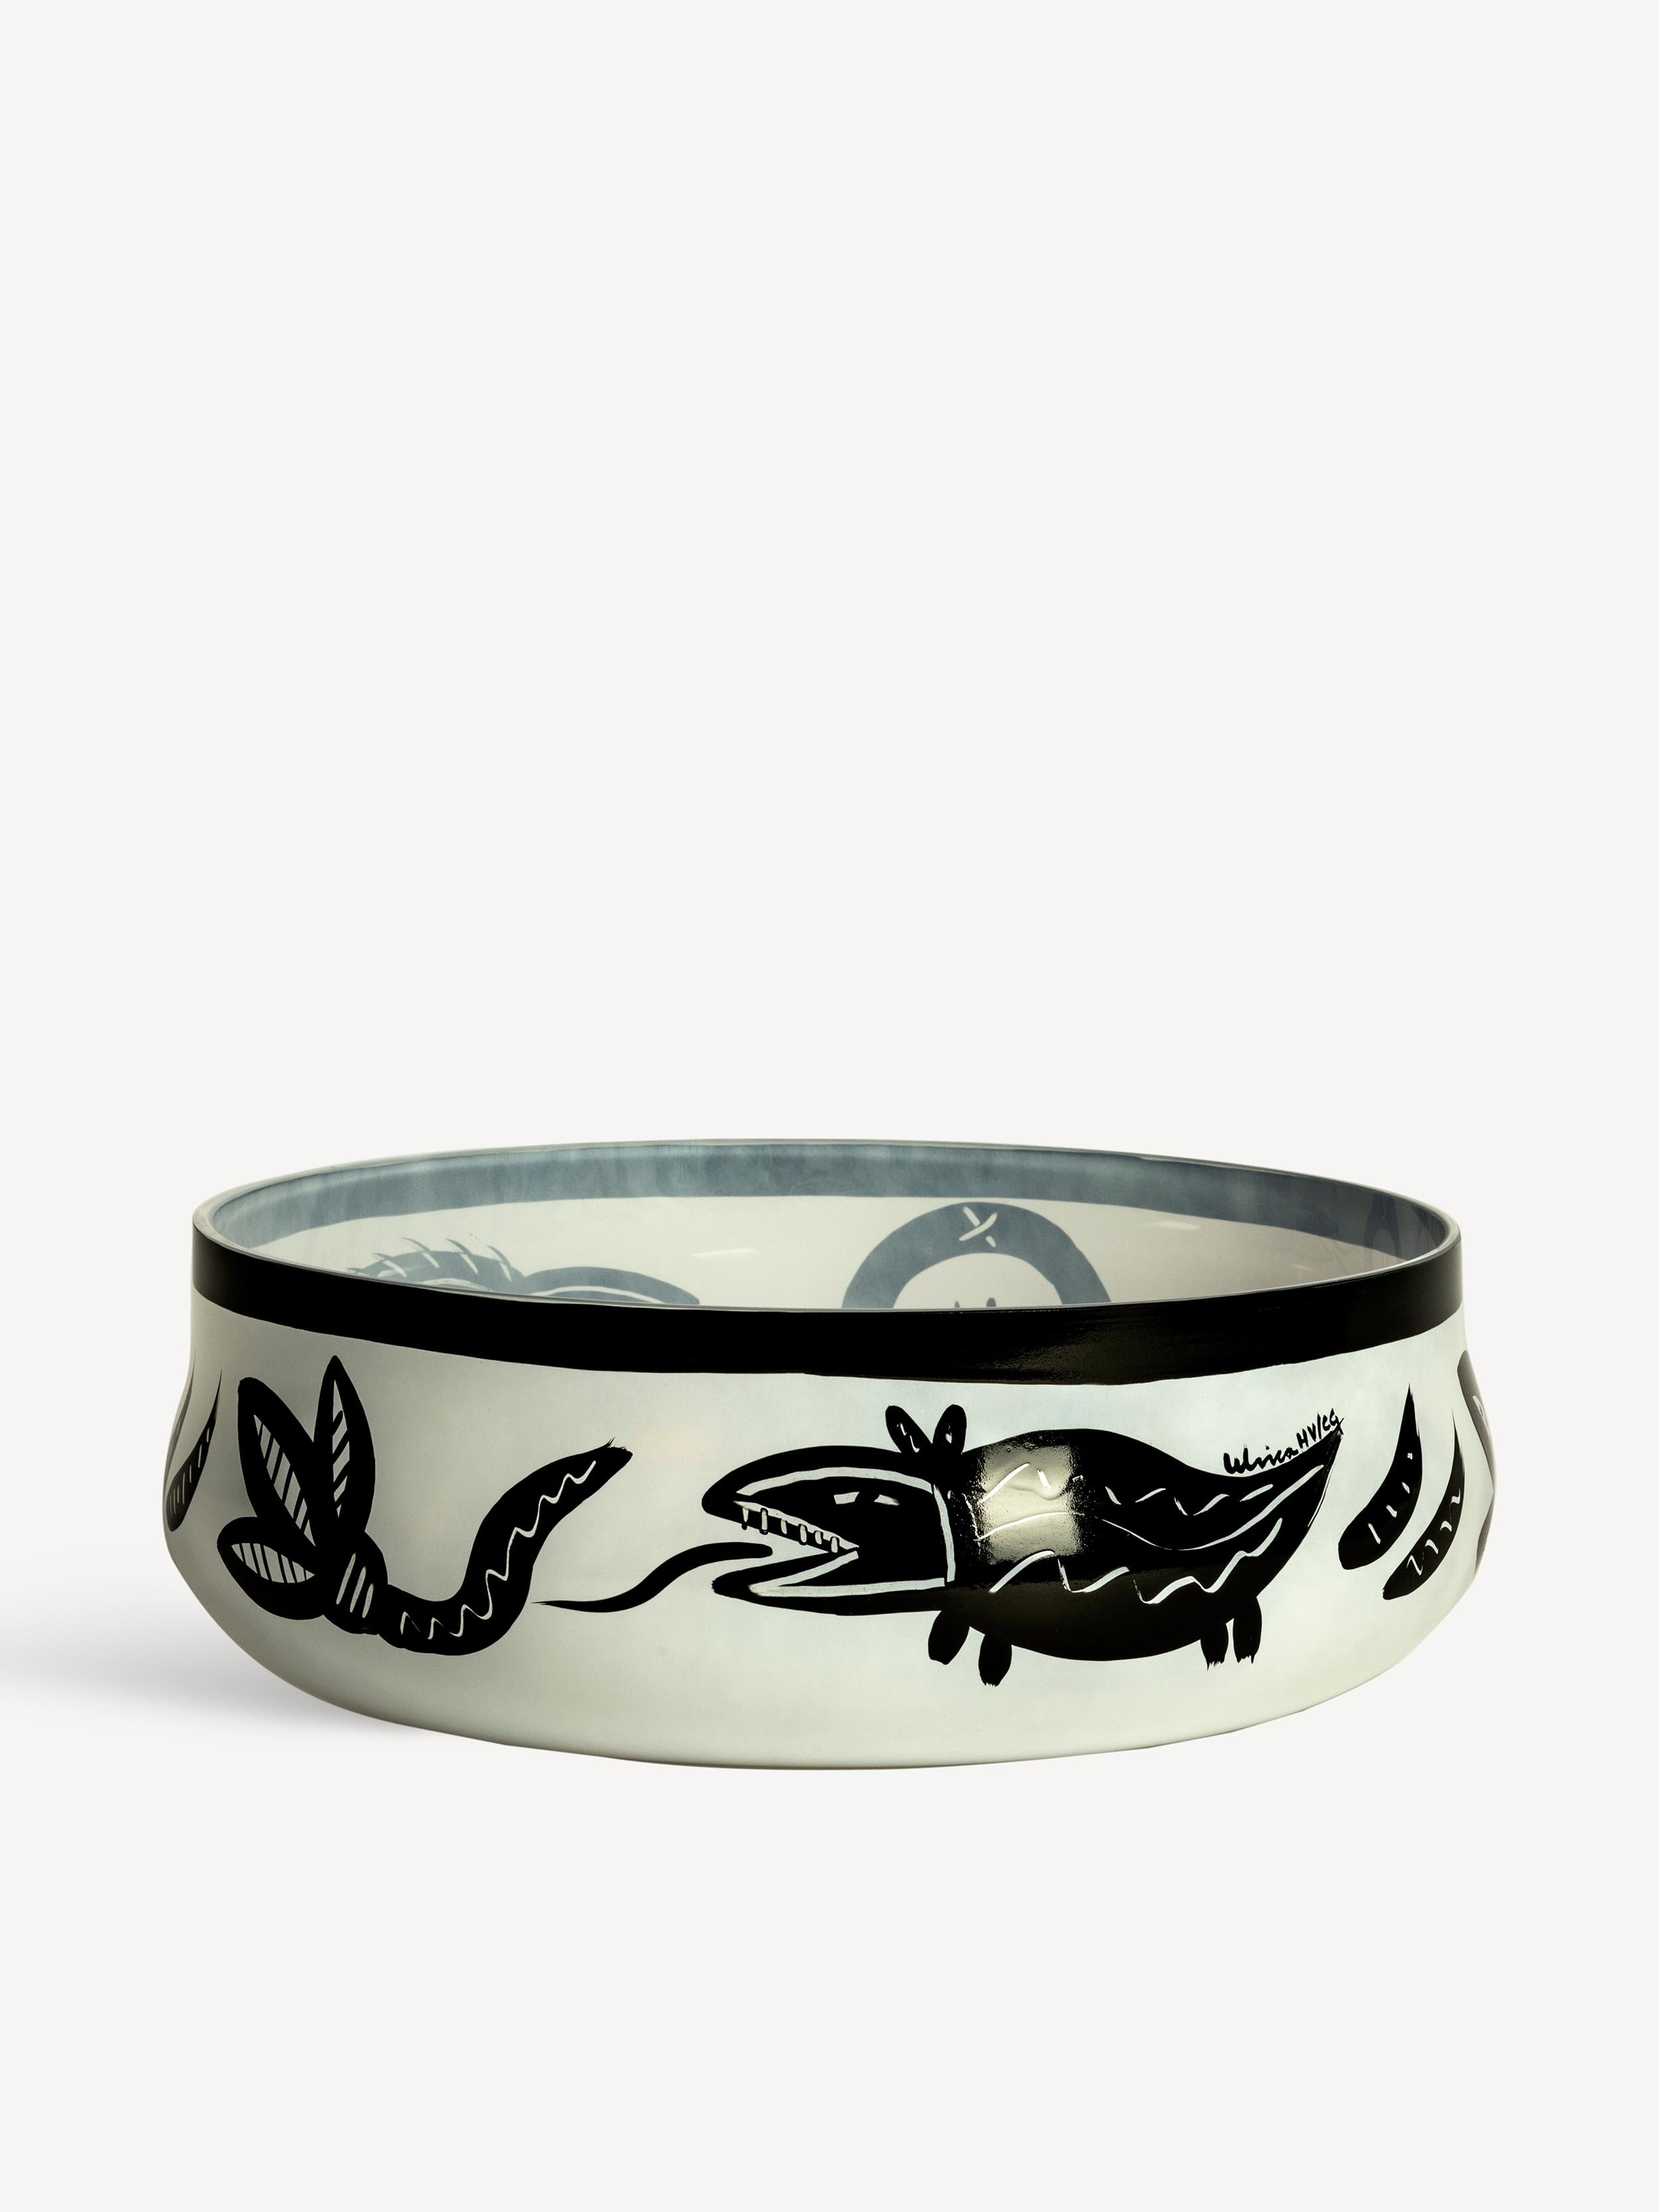 Caramba from Kosta Boda is inspired by Mexico. “¡Ay, caramba!” is a bold statement that contributes to the power of the hand-painted black details on this mouth-blown dish: slithering snakes, jumping fish, and wildly blossoming flowers. The bowl is